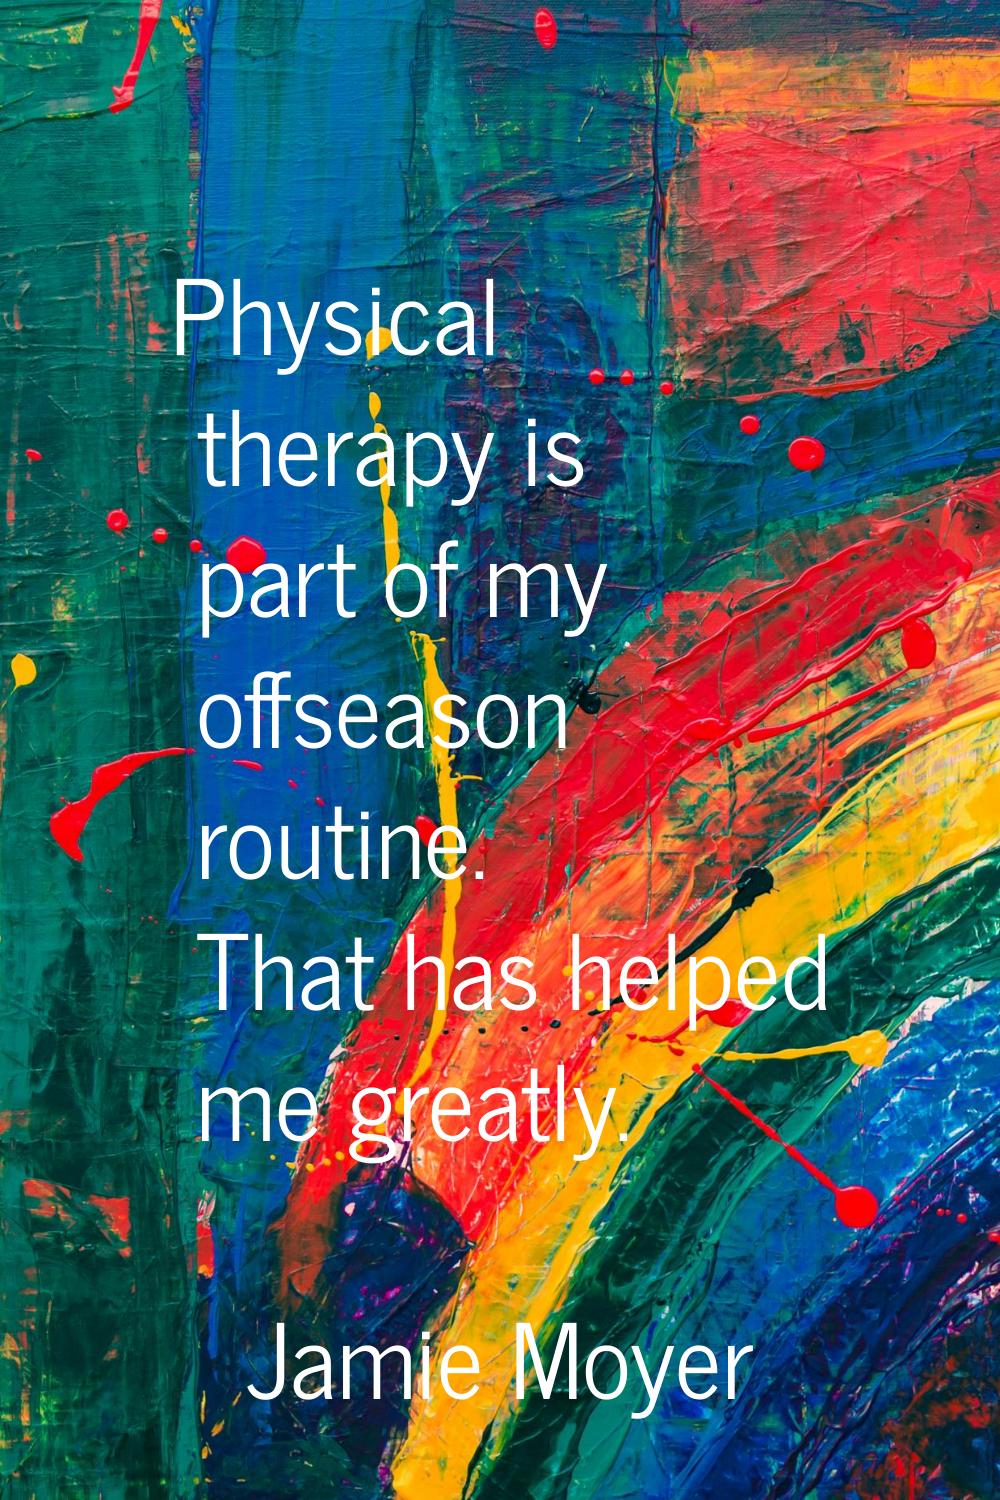 Physical therapy is part of my offseason routine. That has helped me greatly.